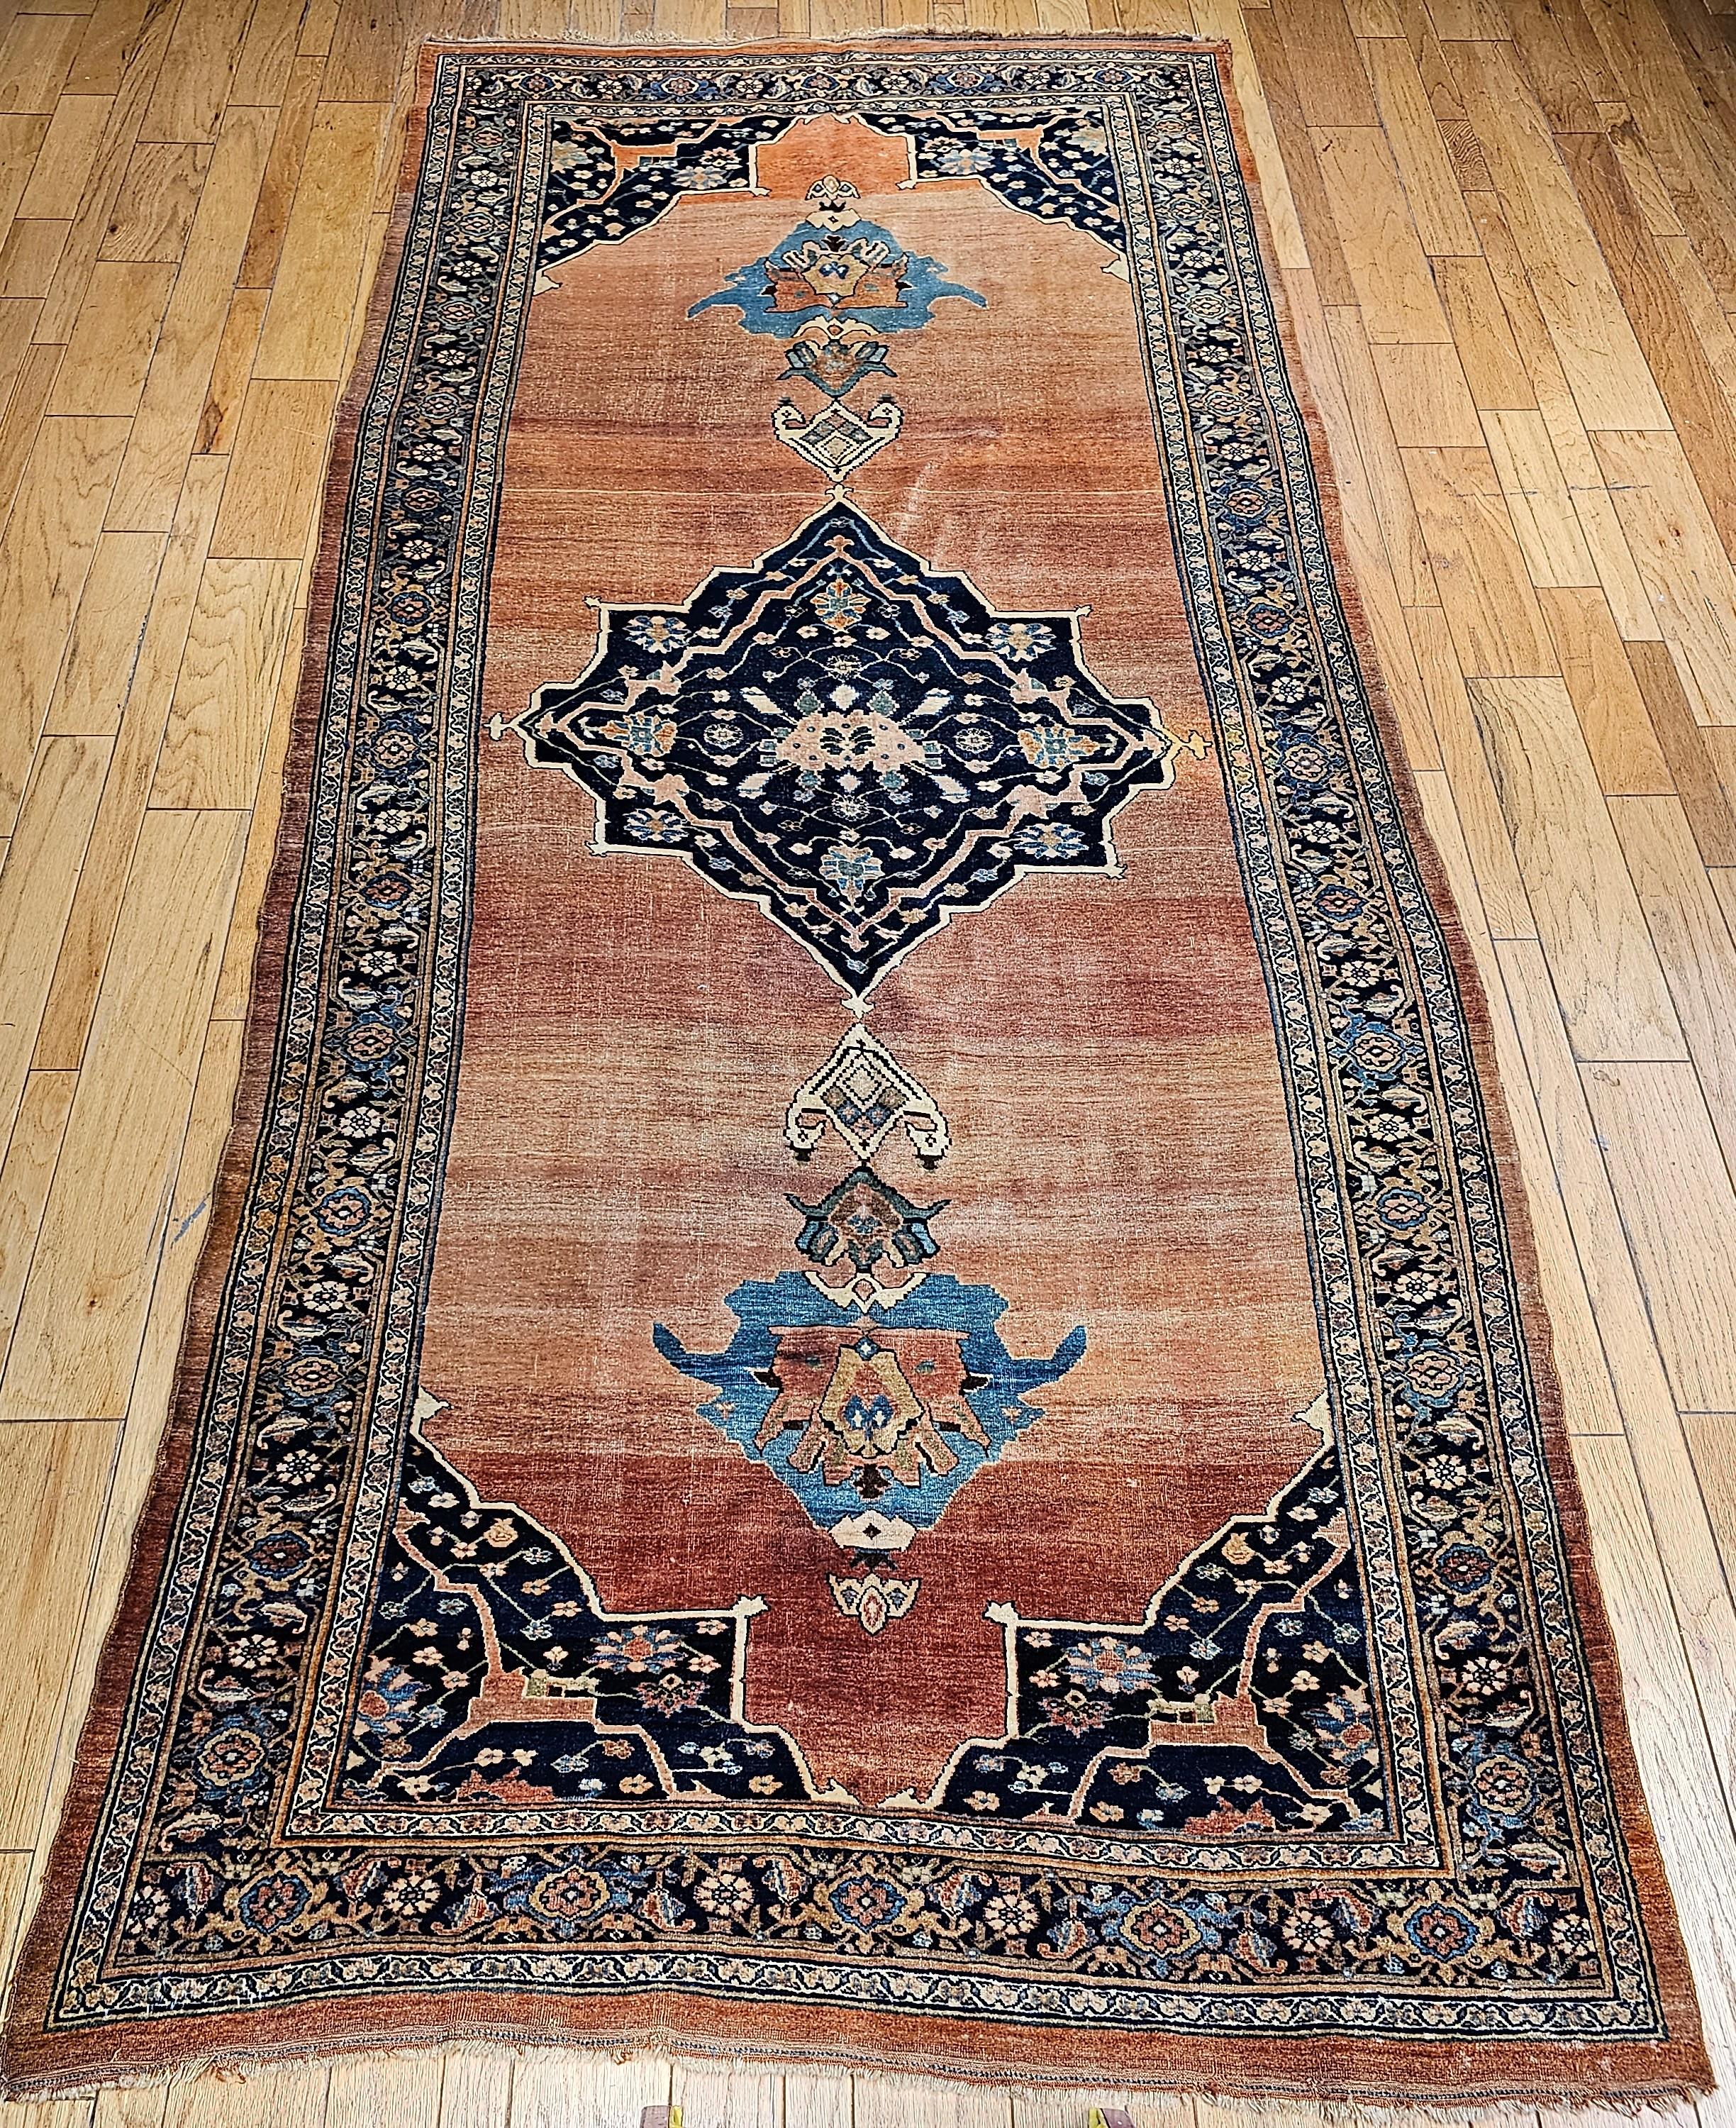 19th Century Persian Bidjar Gallery Rug in Brick-Red, Navy, Turquoise, Yellow For Sale 10